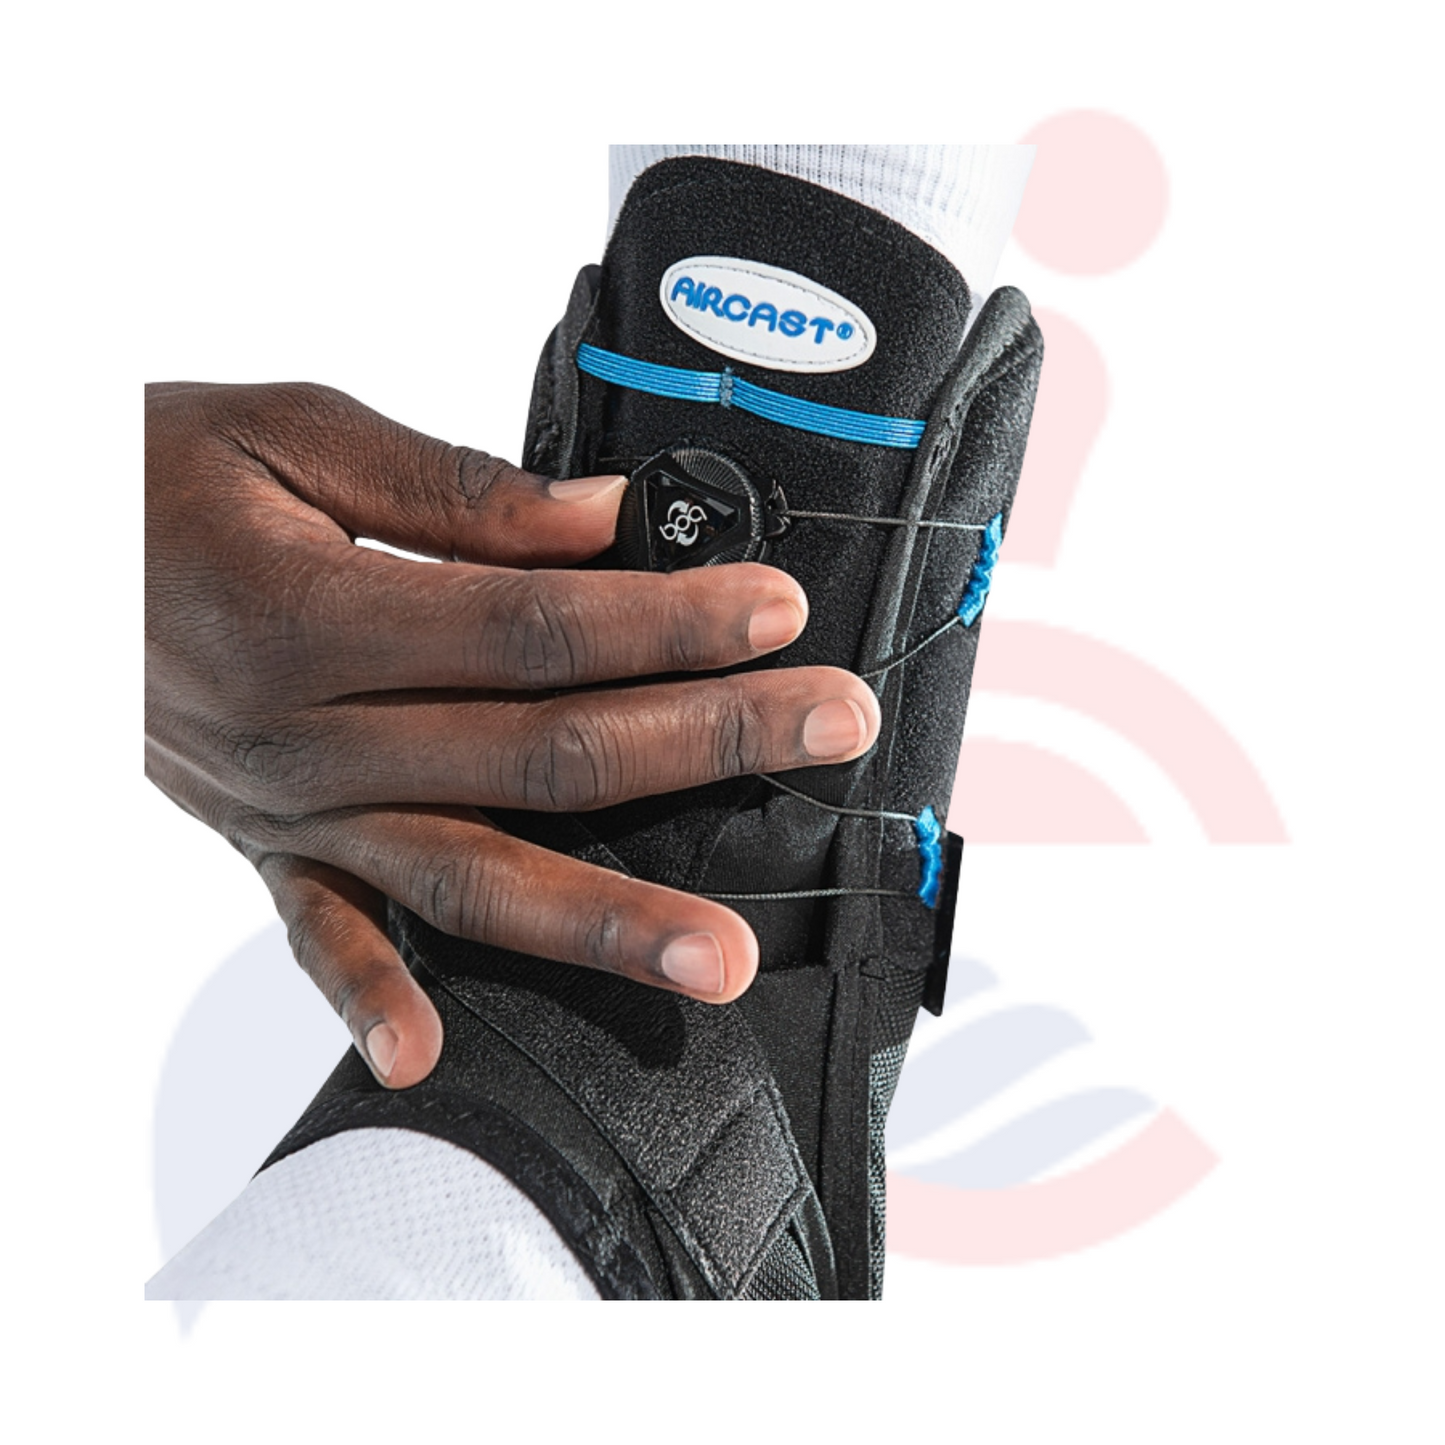 Aircast® AirSport+ Ankle Brace